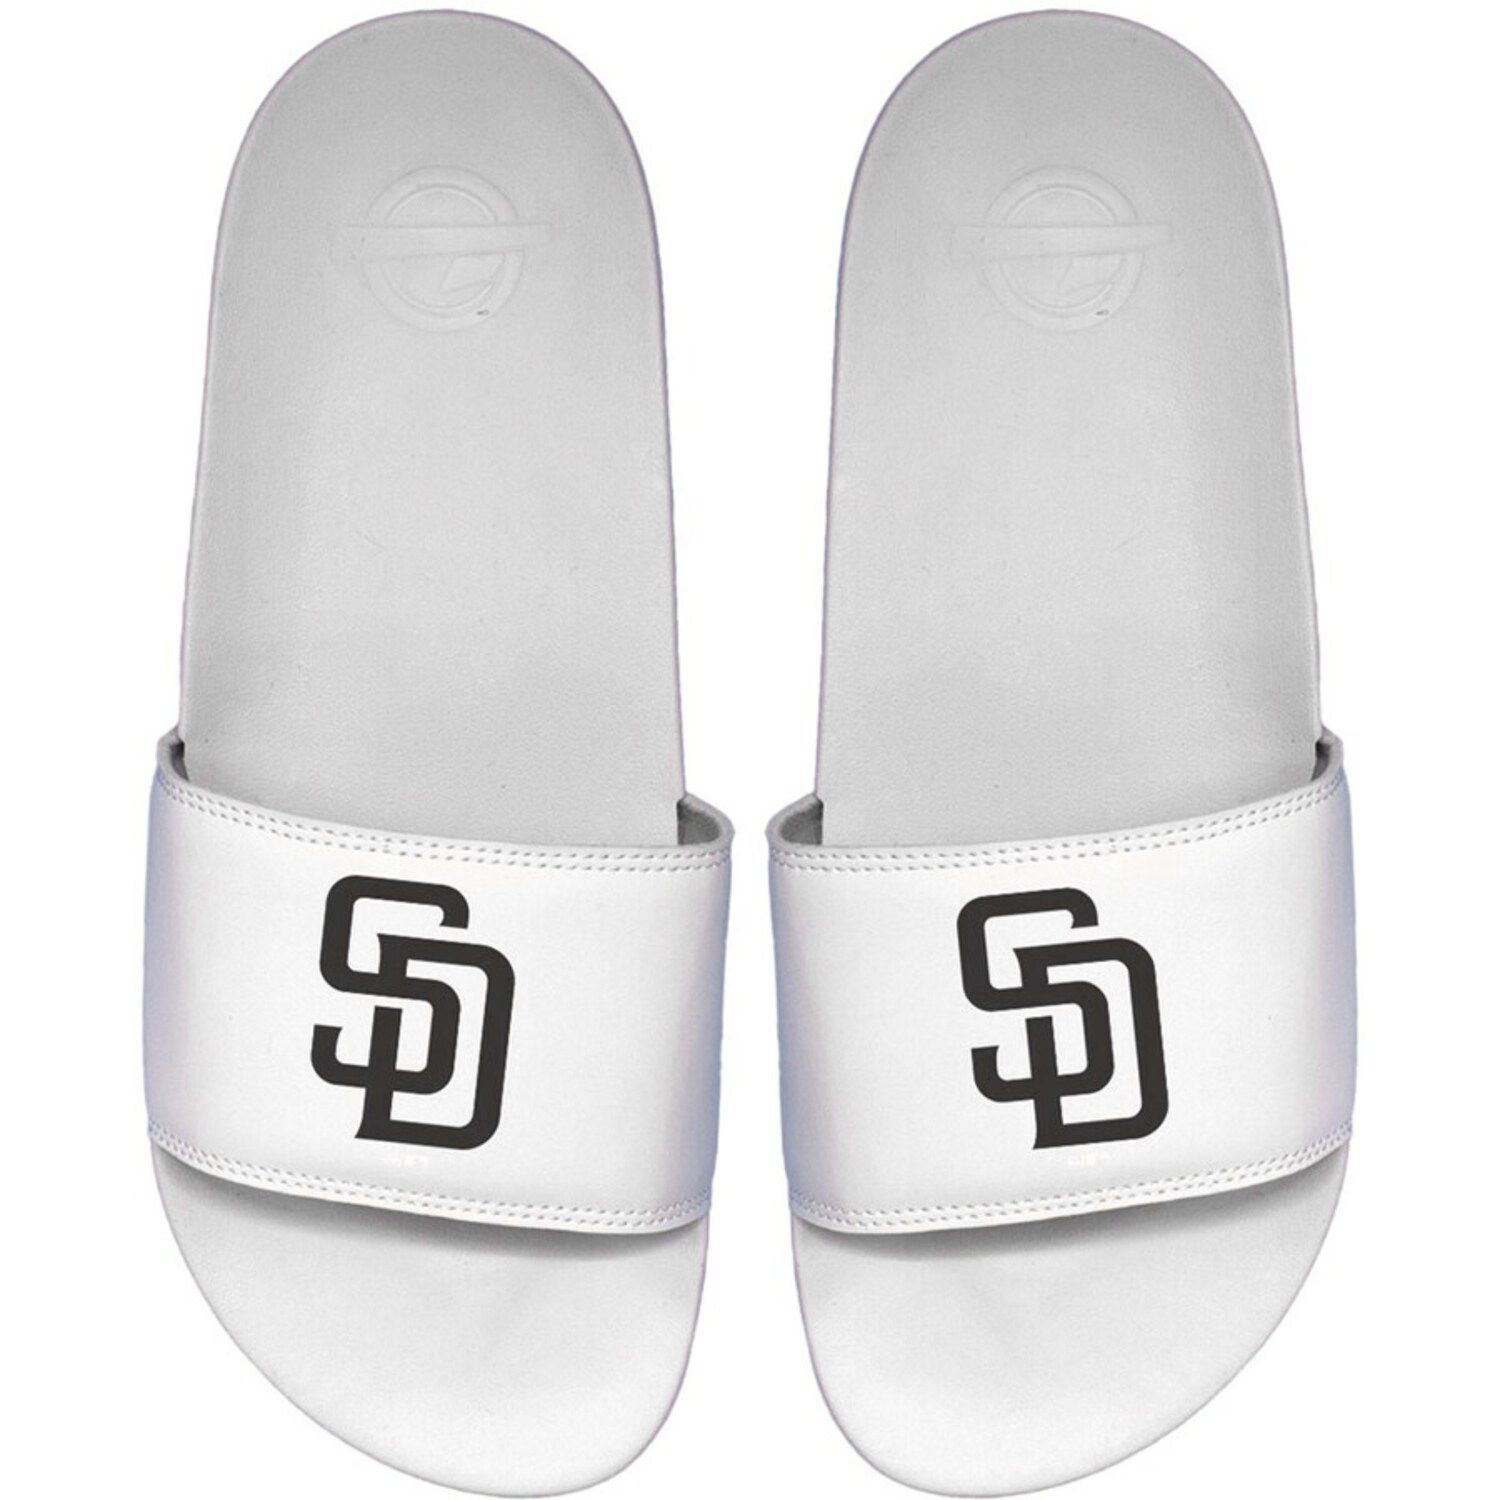 Image for Unbranded Men's ISlide White San Diego Padres Primary Motto Slide Sandals at Kohl's.